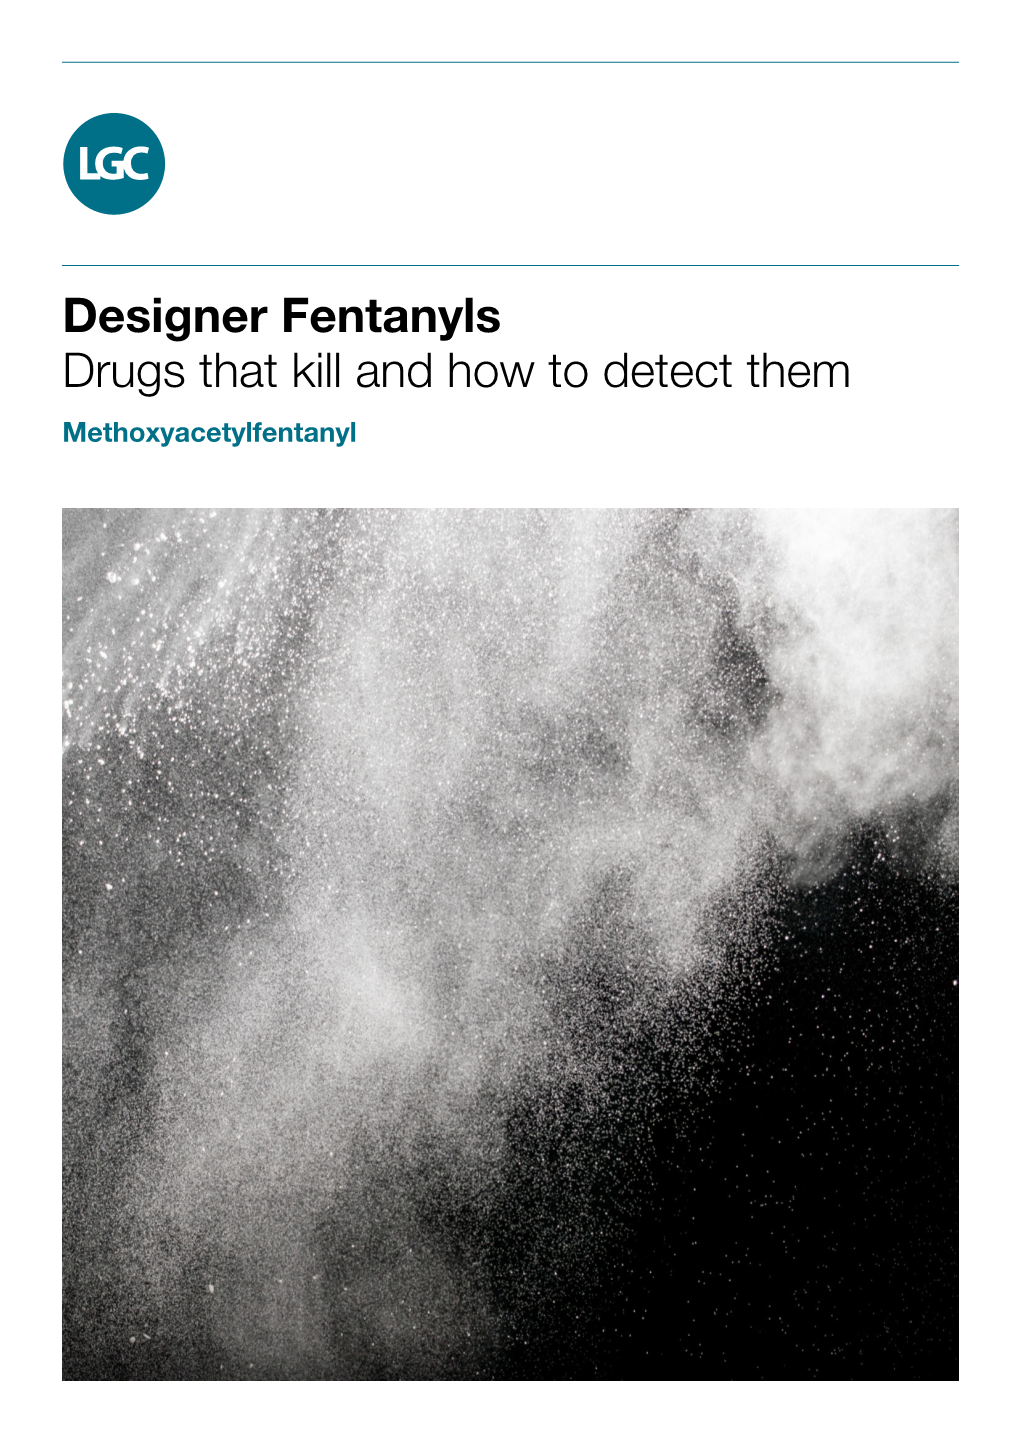 Methoxyacetylfentanyl Science for a Safer World